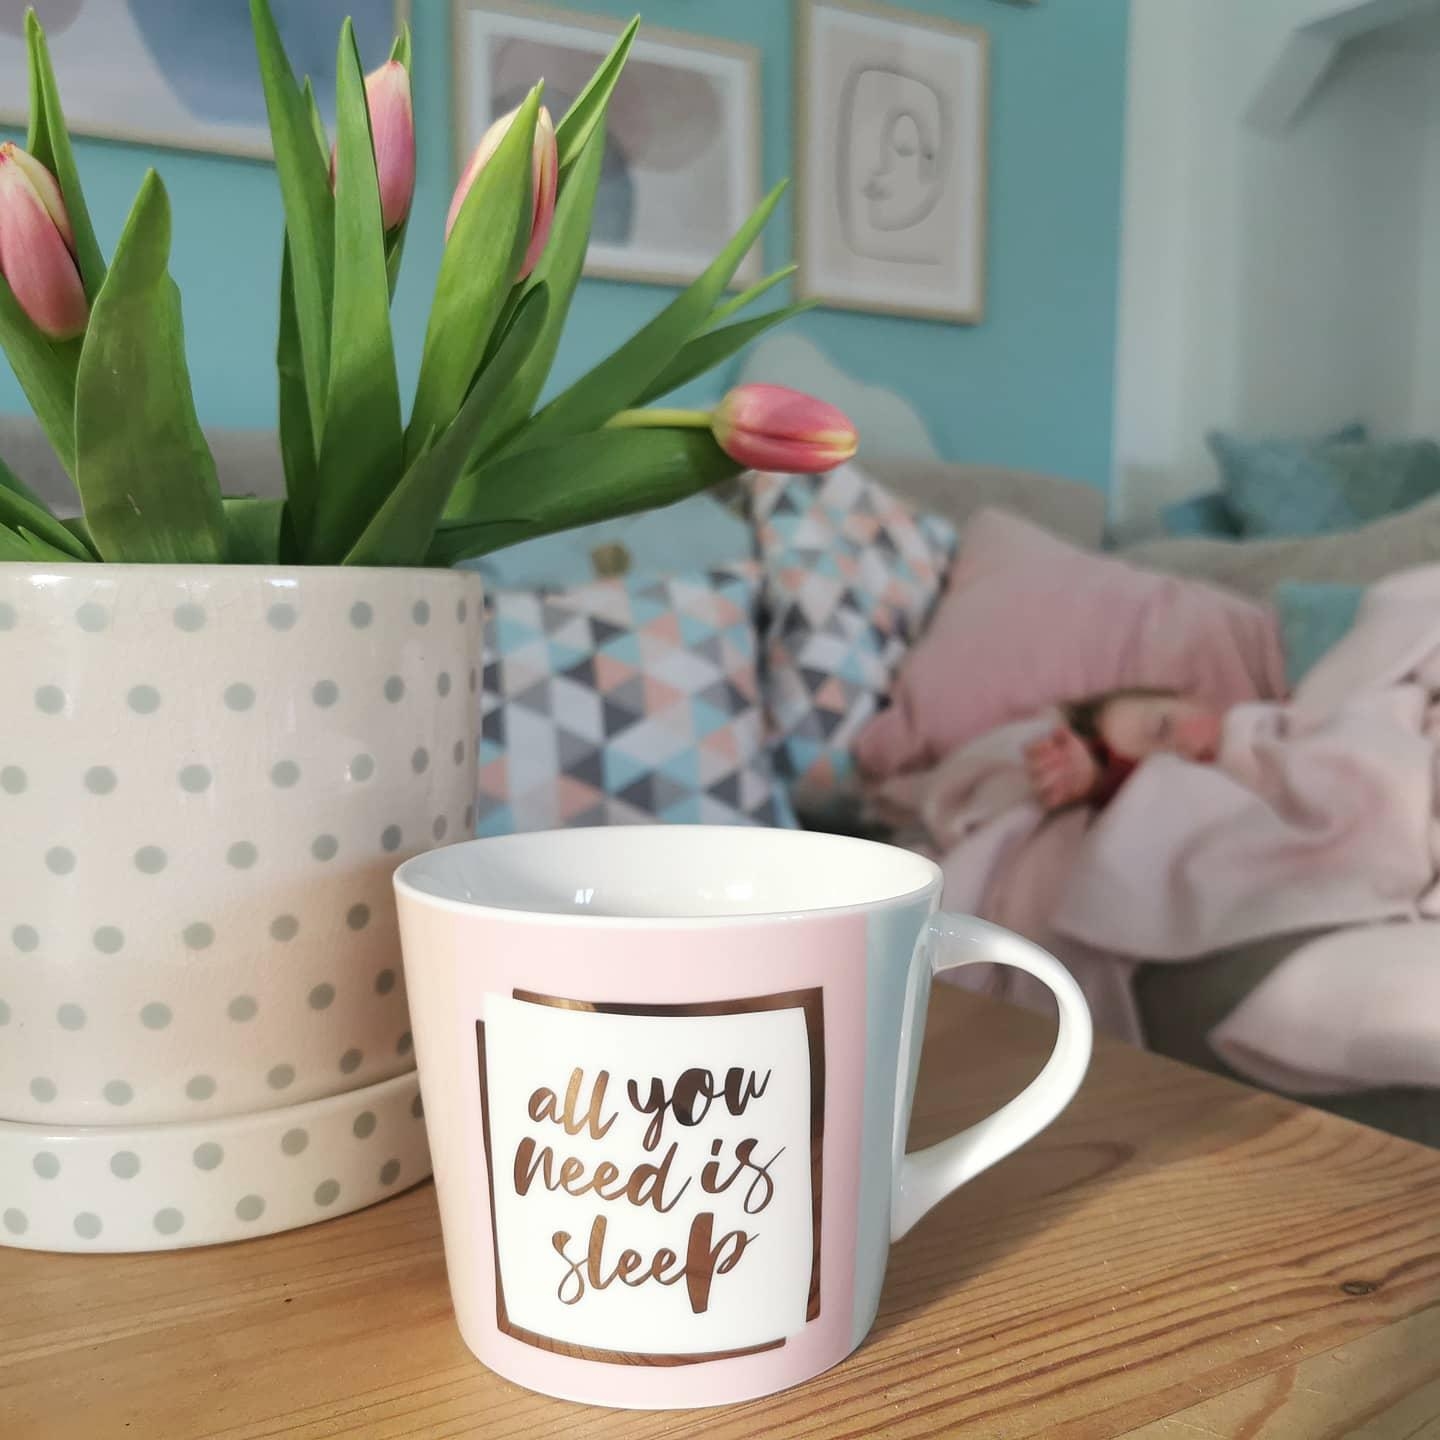 All you need is sleep... and happy colours. #bunt #pastell #frühling #spring #coffeelove #livingroom